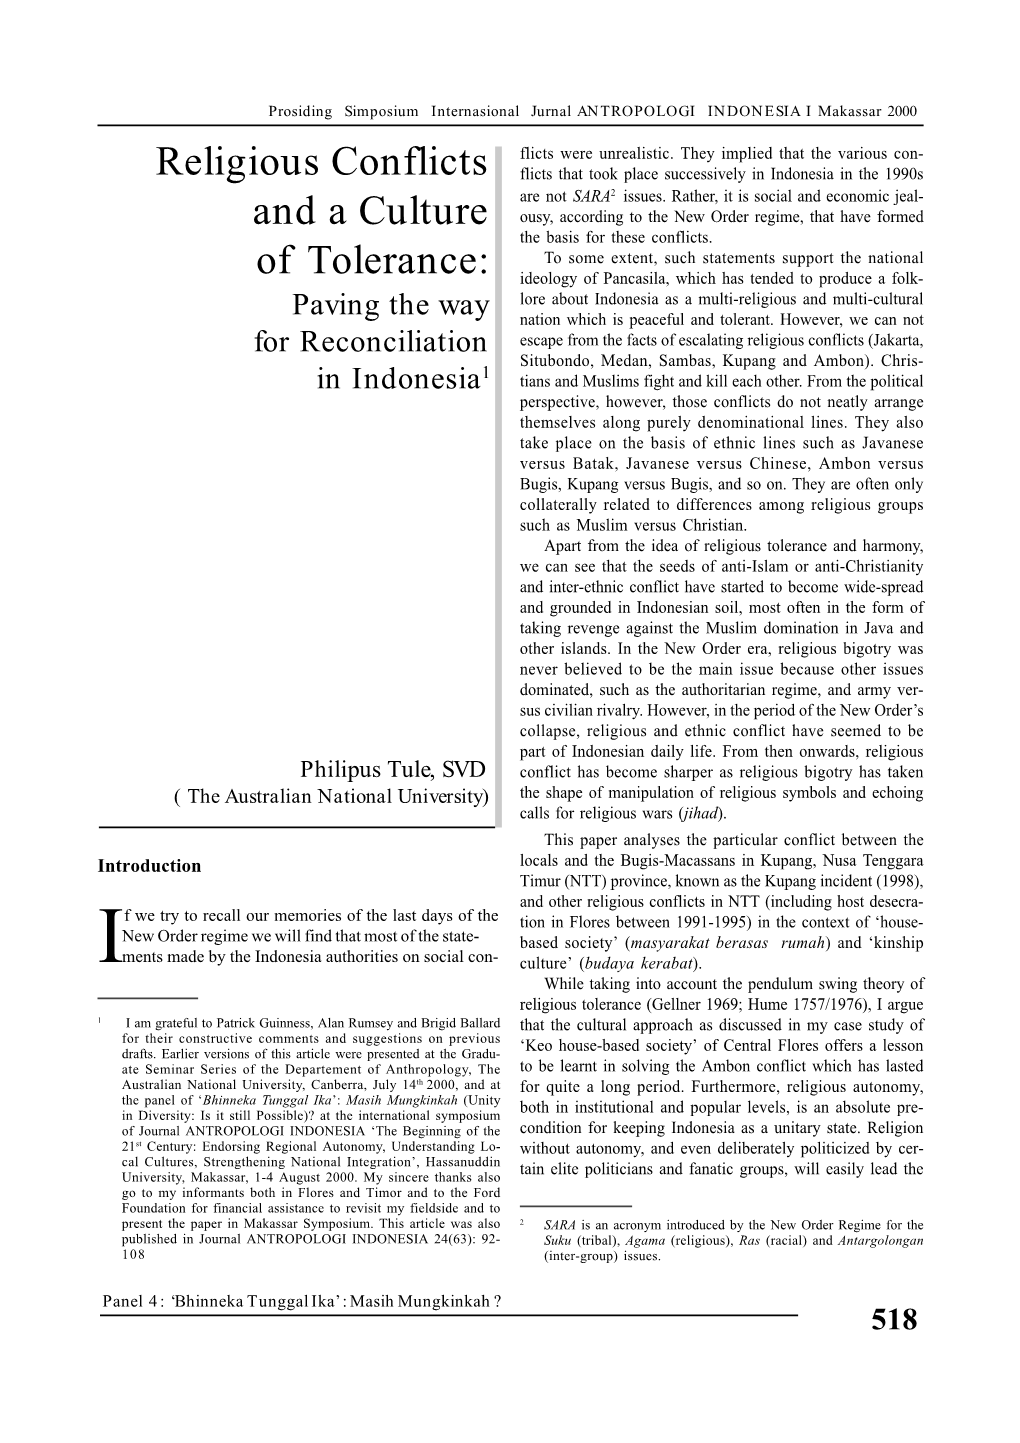 Religious Conflicts and a Culture of Tolerance